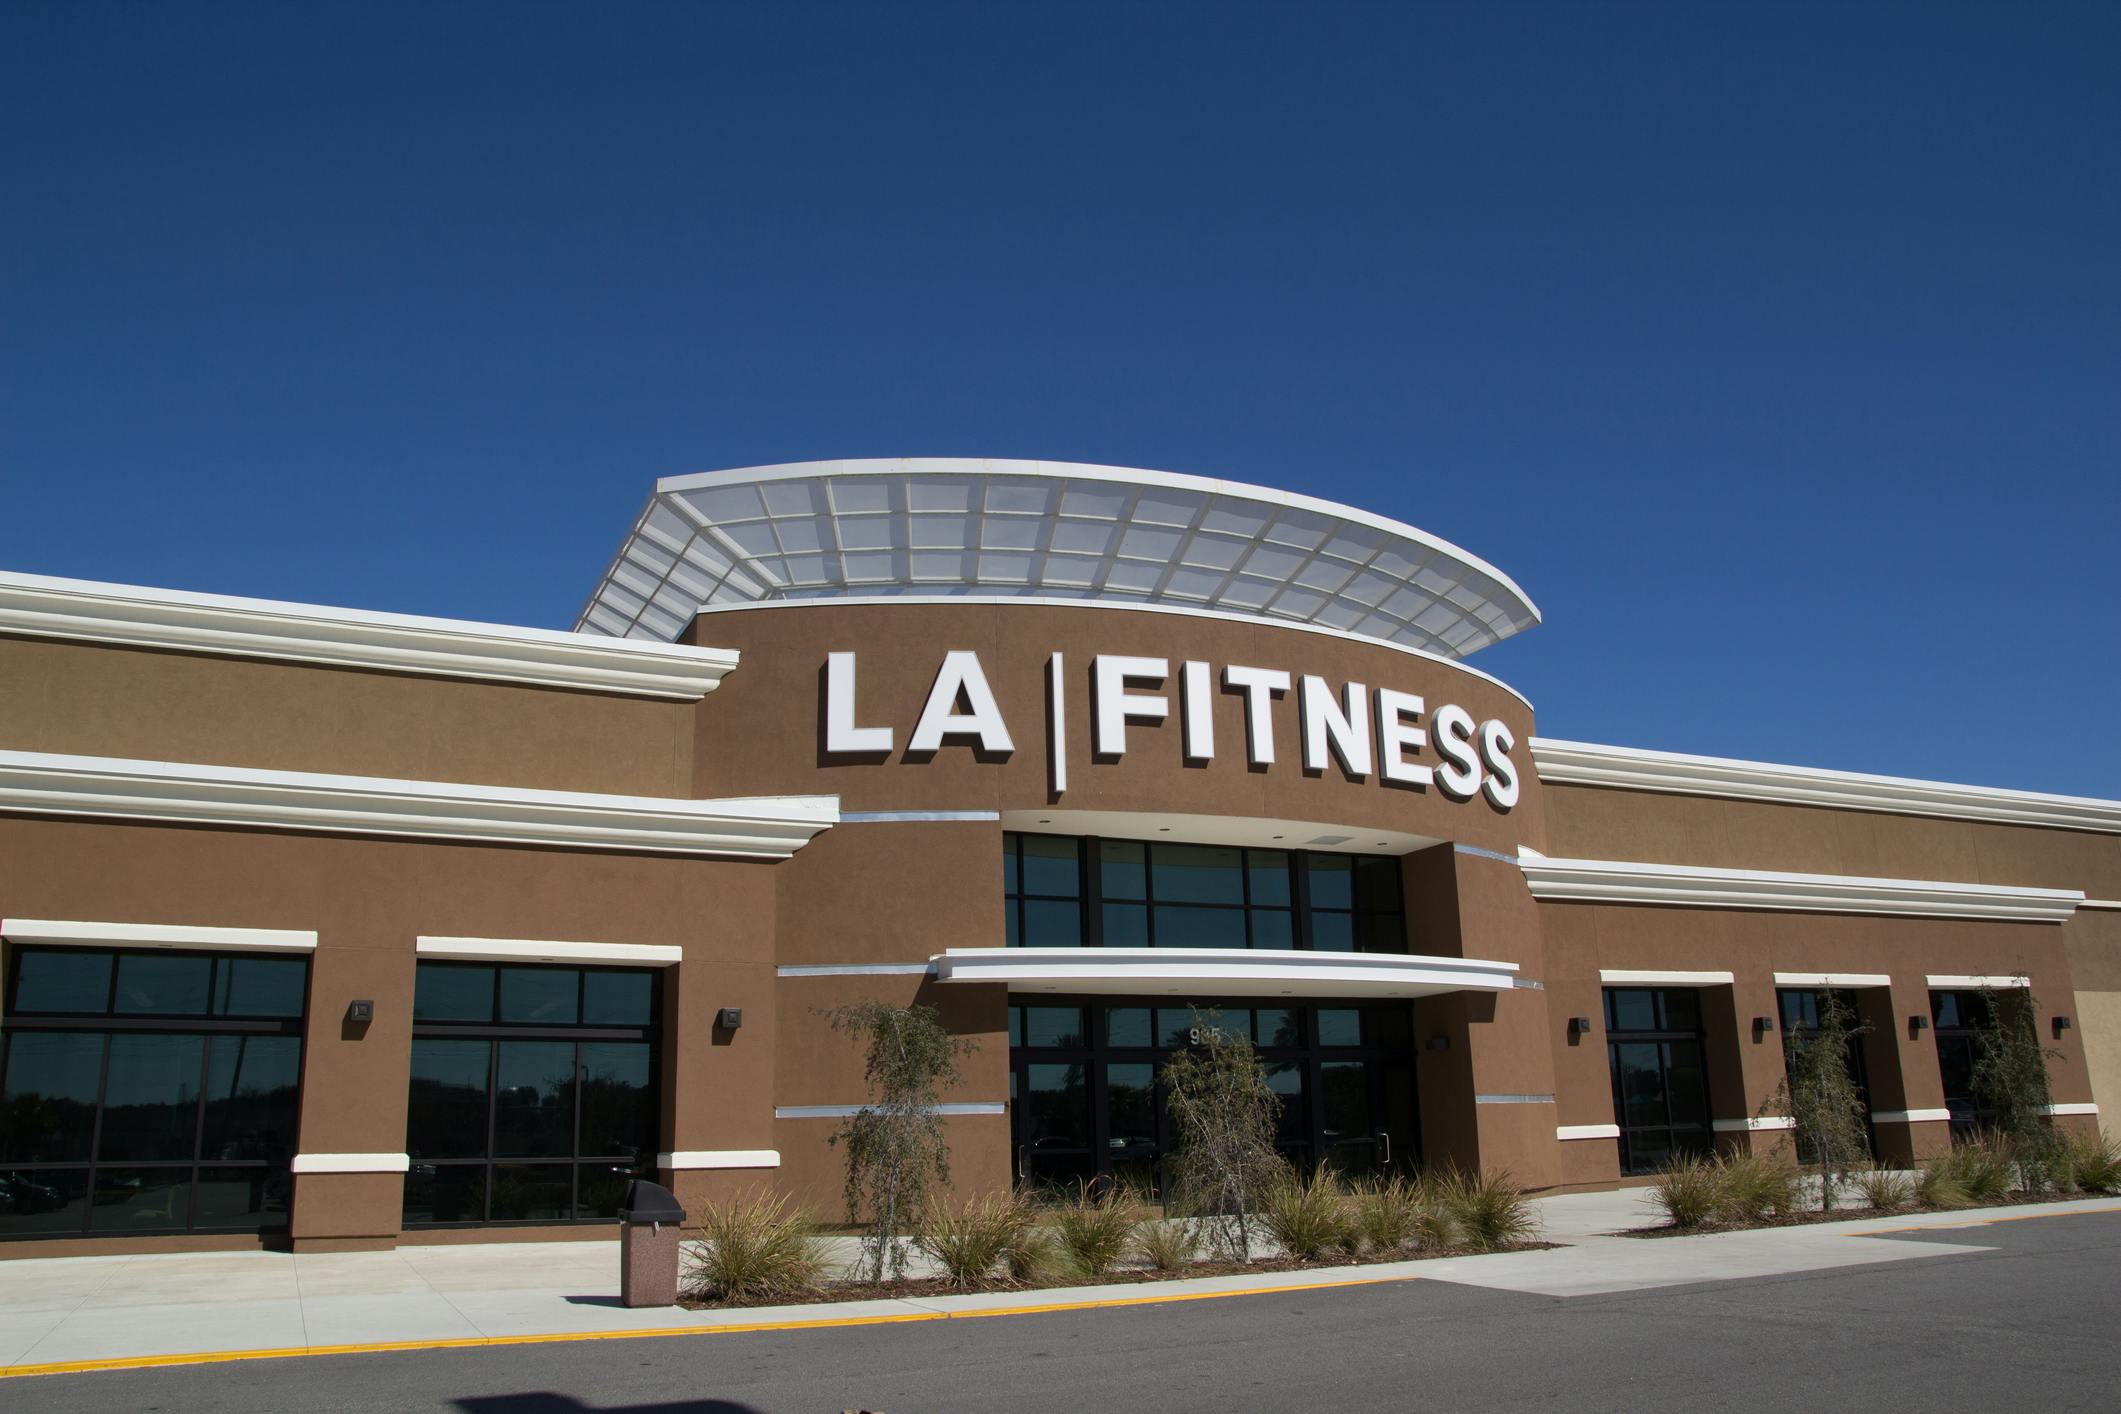 15 Minute How to get la fitness discount for Weight Loss